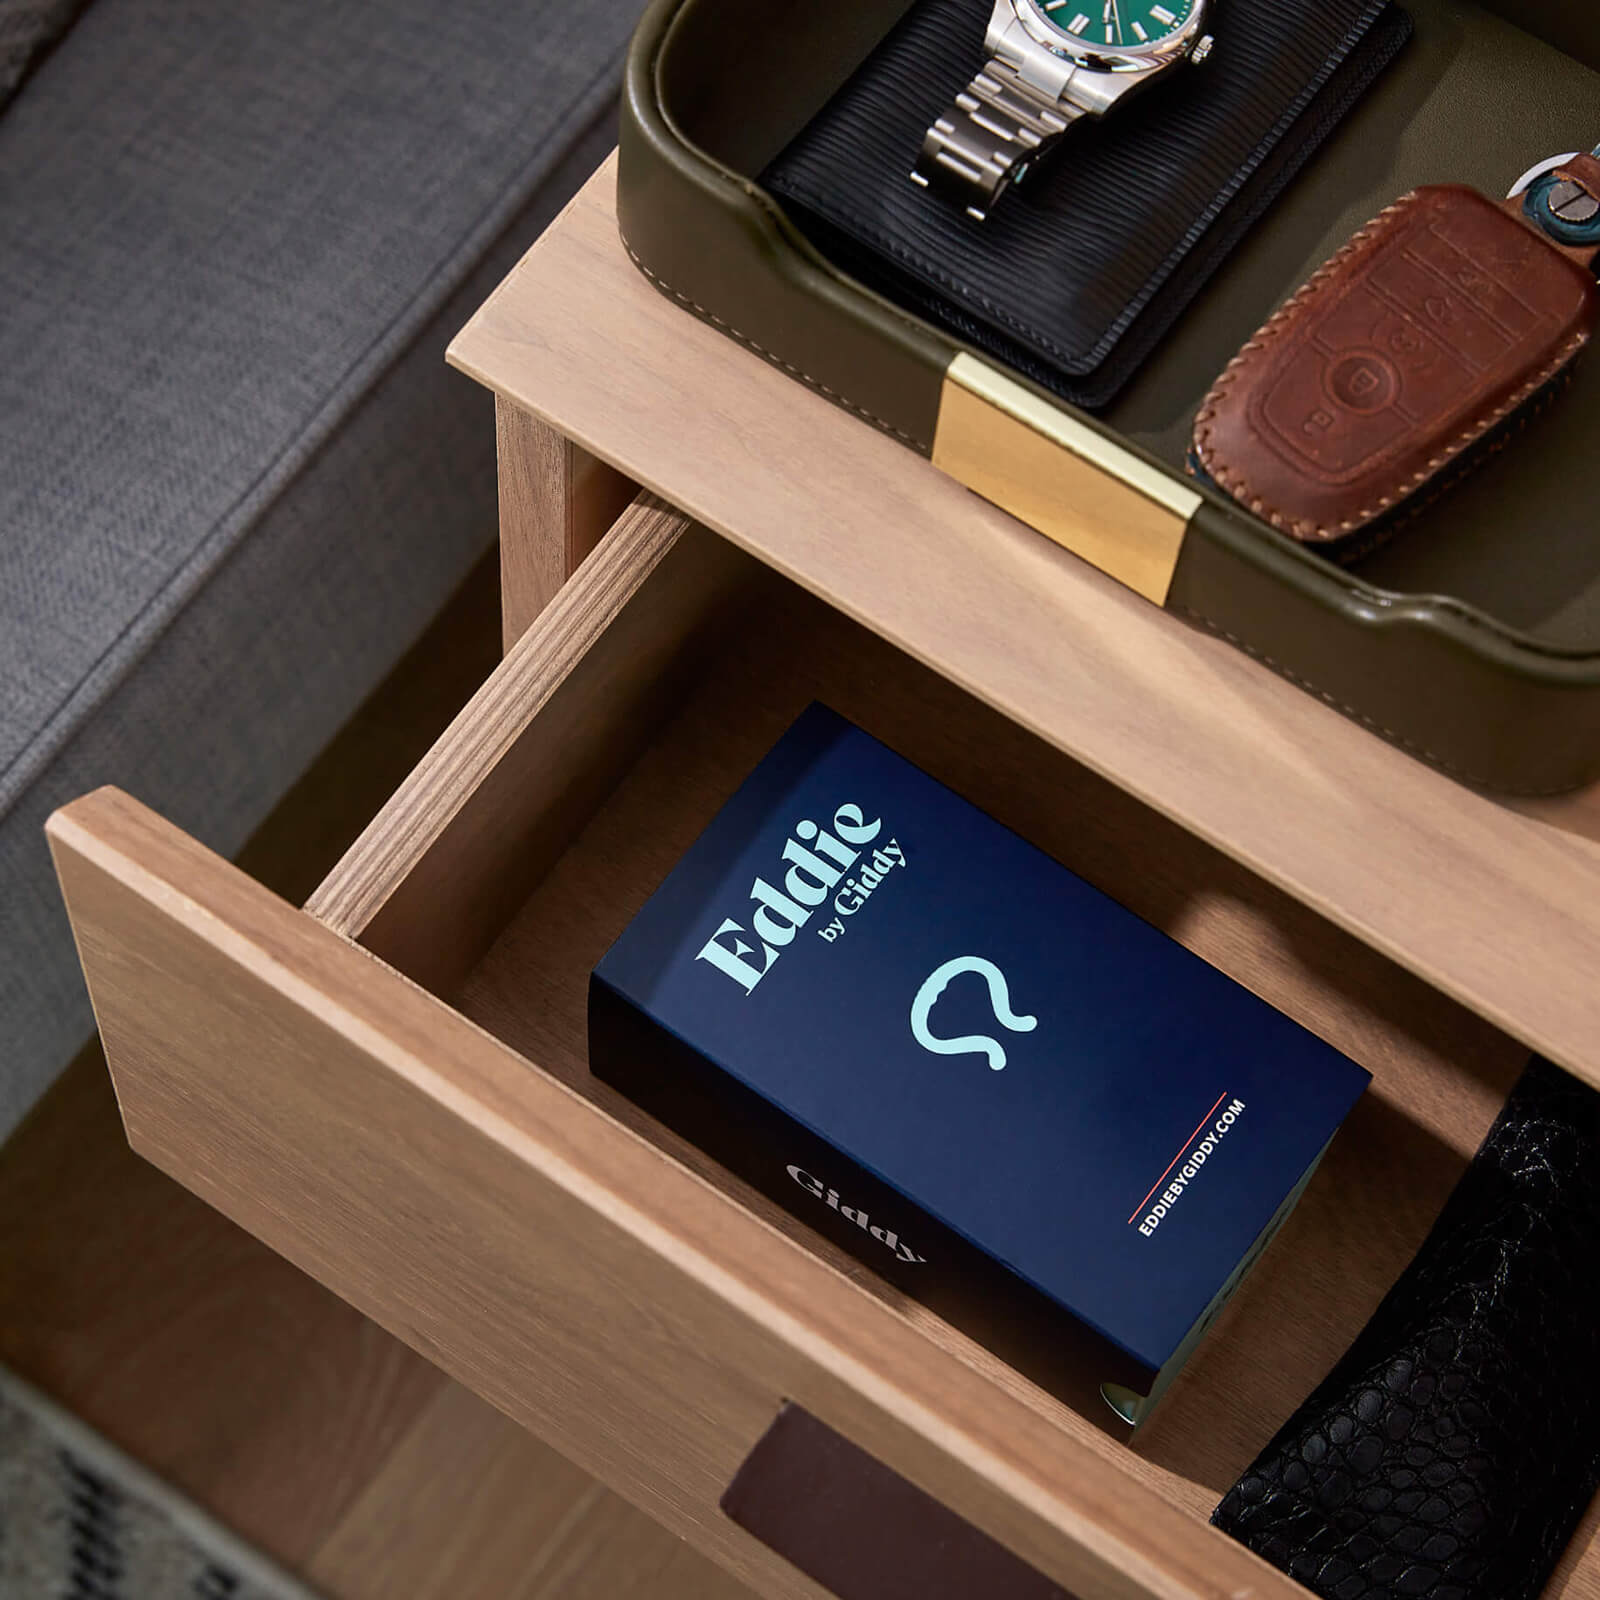 Eddie Product Box Shown in Nightstand Drawer